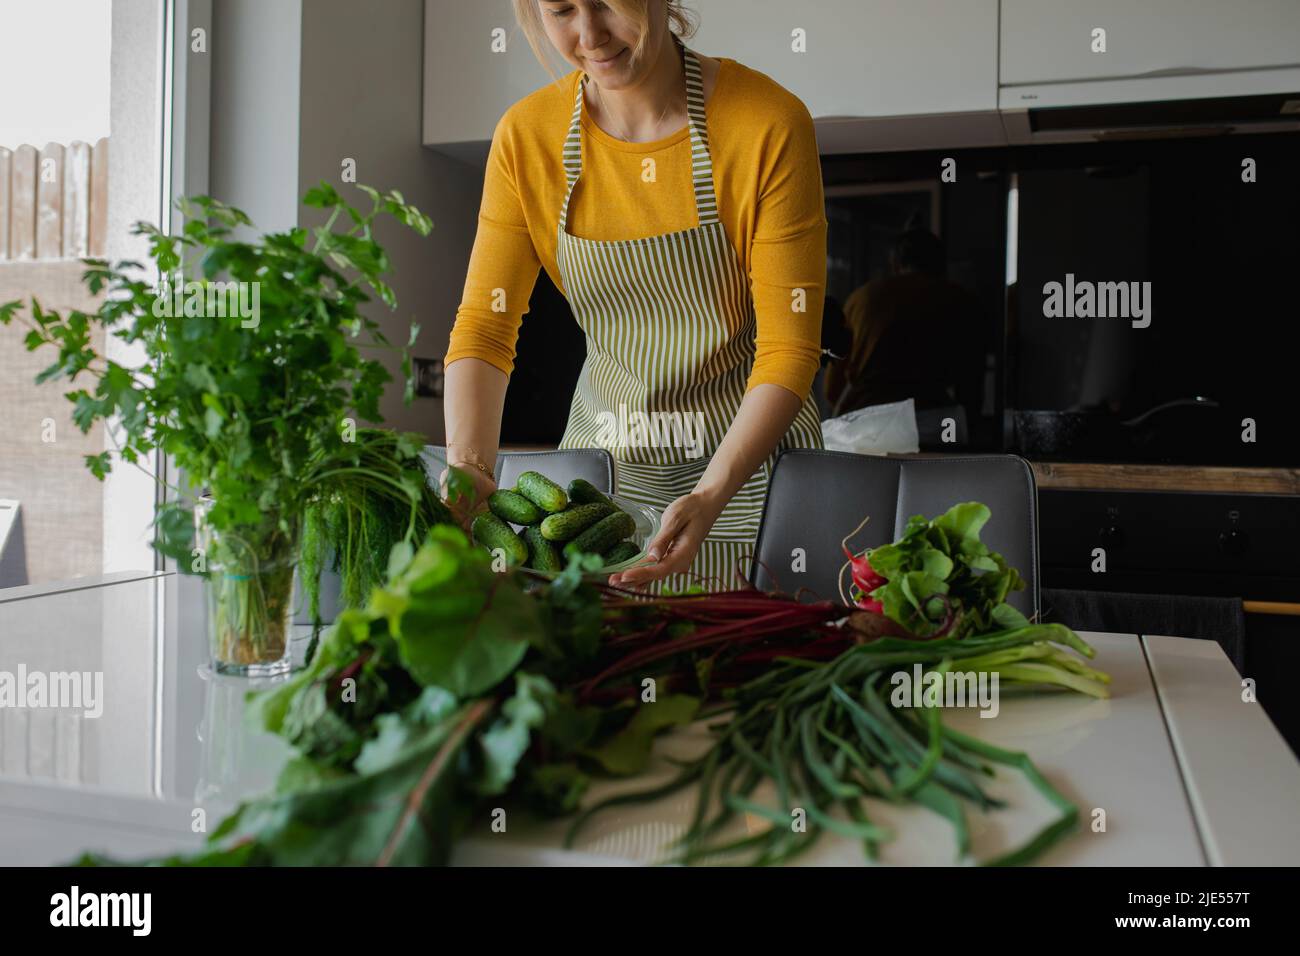 Blond woman in apron cooking healthy fresh vegetable salad in the home kitchen. Organic farming dish for loosing weight Stock Photo